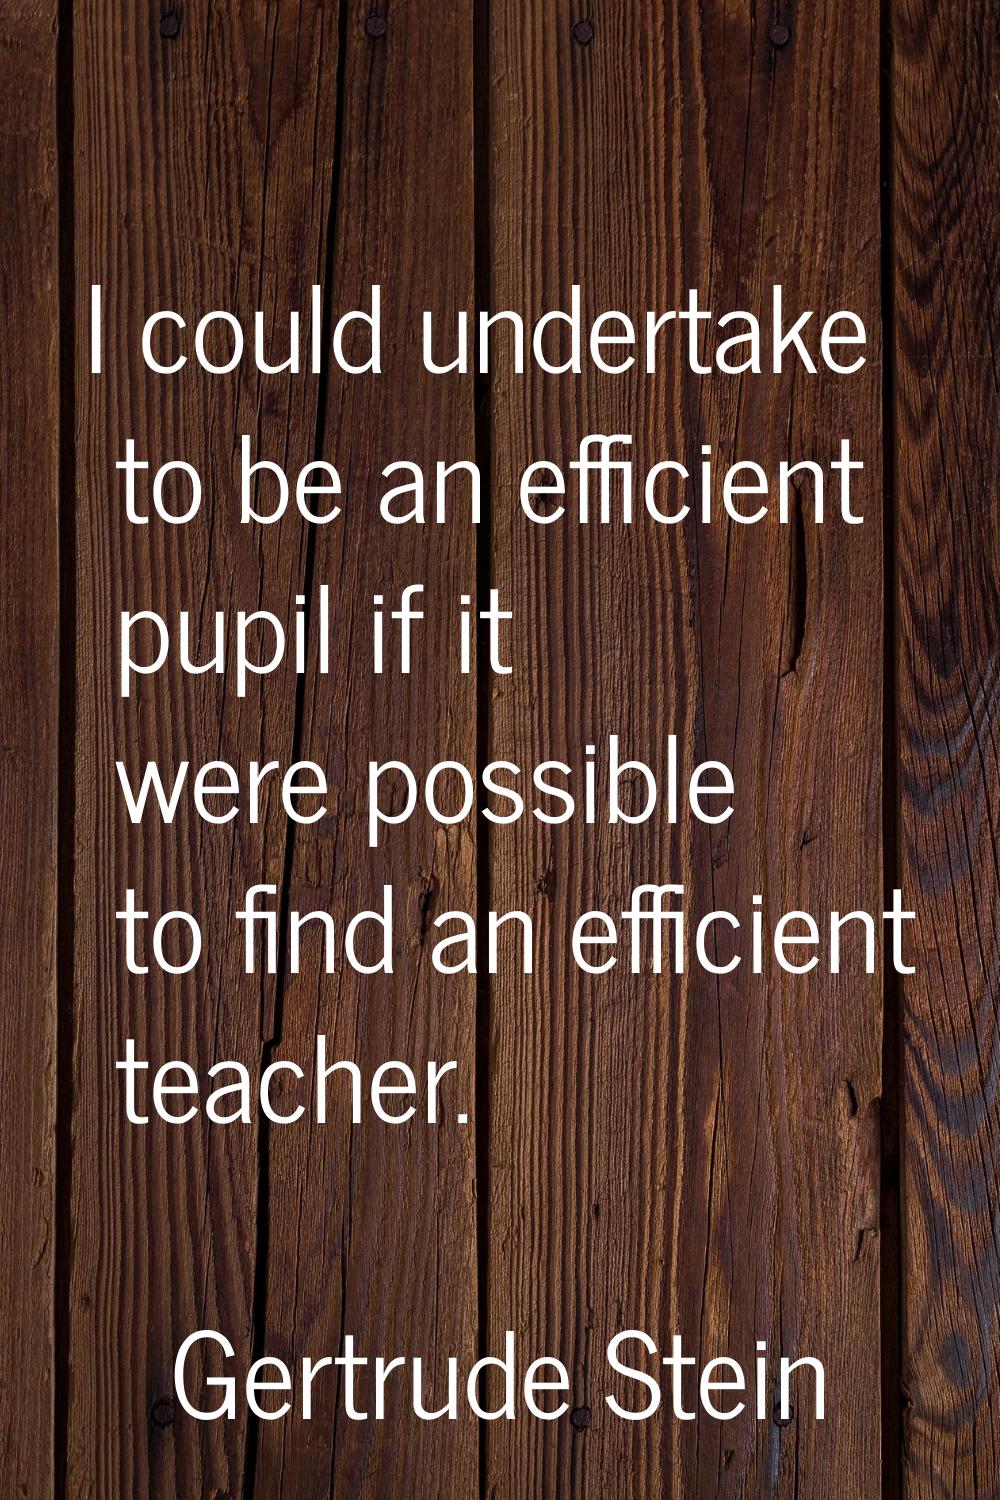 I could undertake to be an efficient pupil if it were possible to find an efficient teacher.